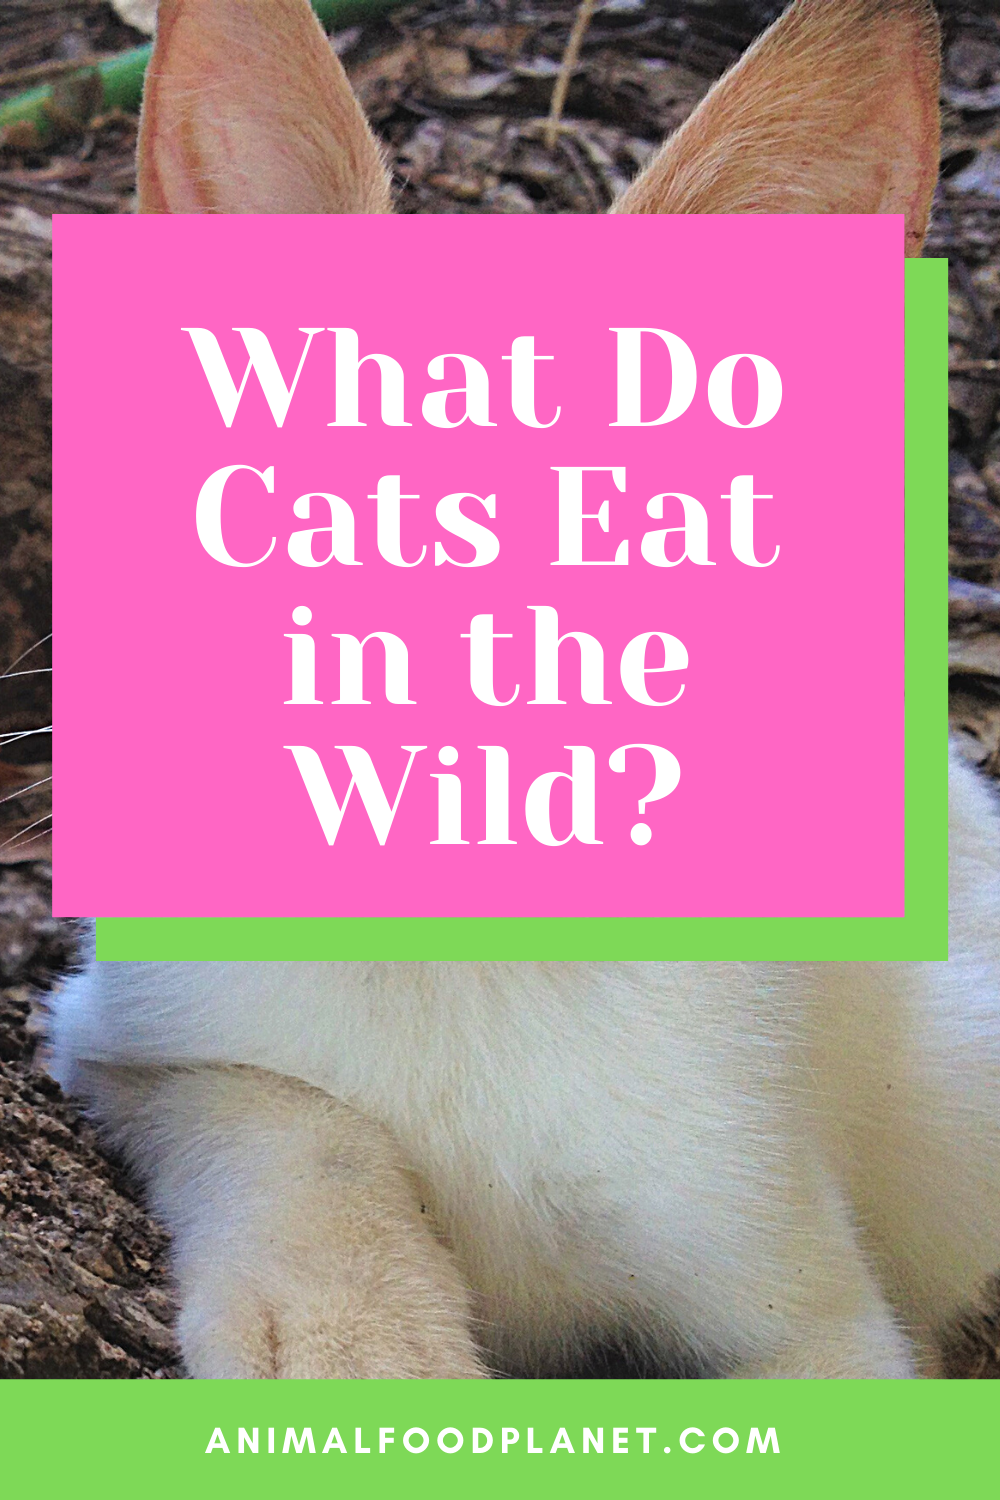 What Do Cats Eat in the Wild